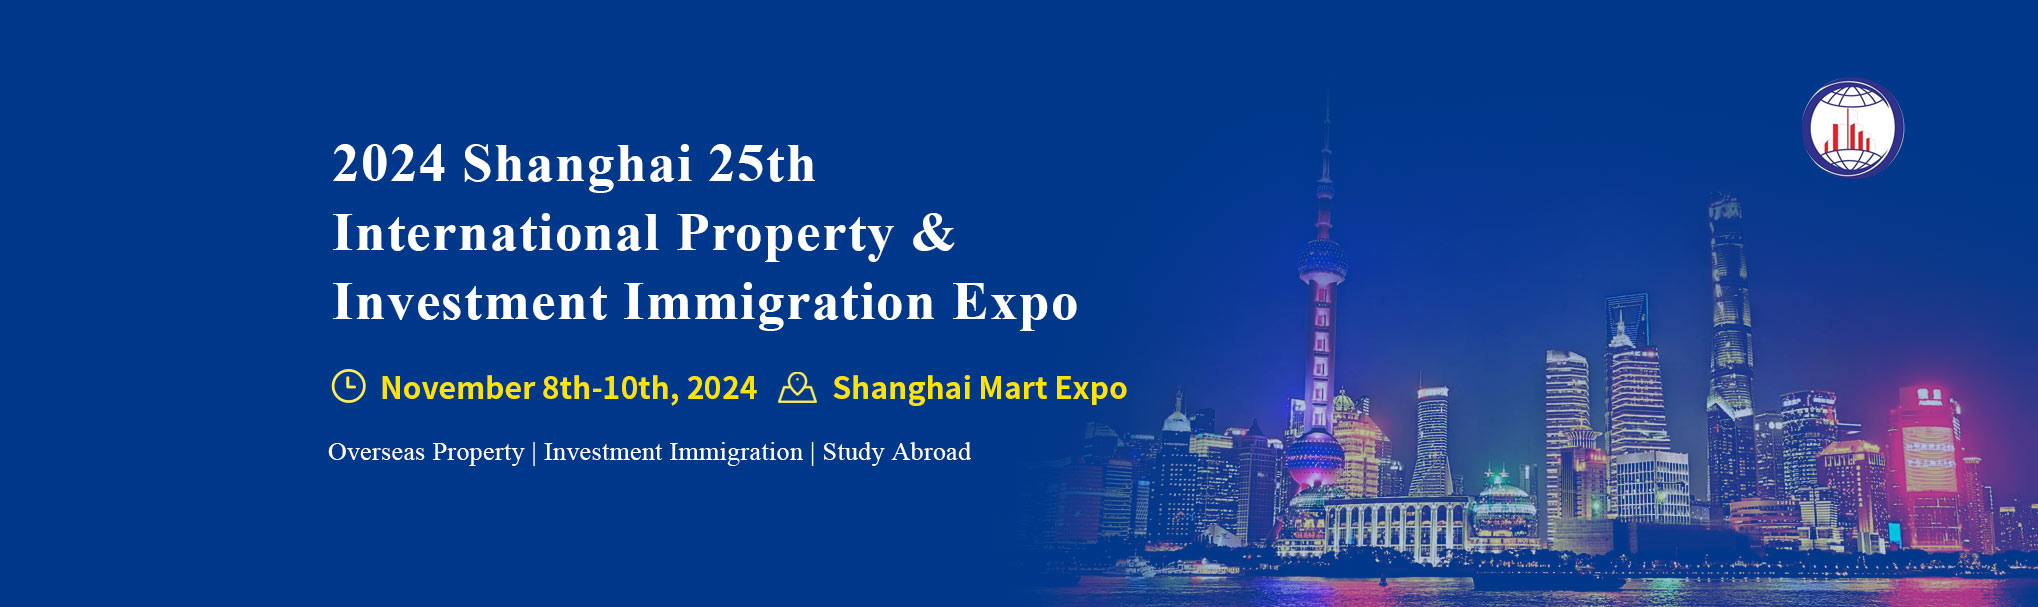 2024 Shanghai 25th International Property & Investment Immigration Expo